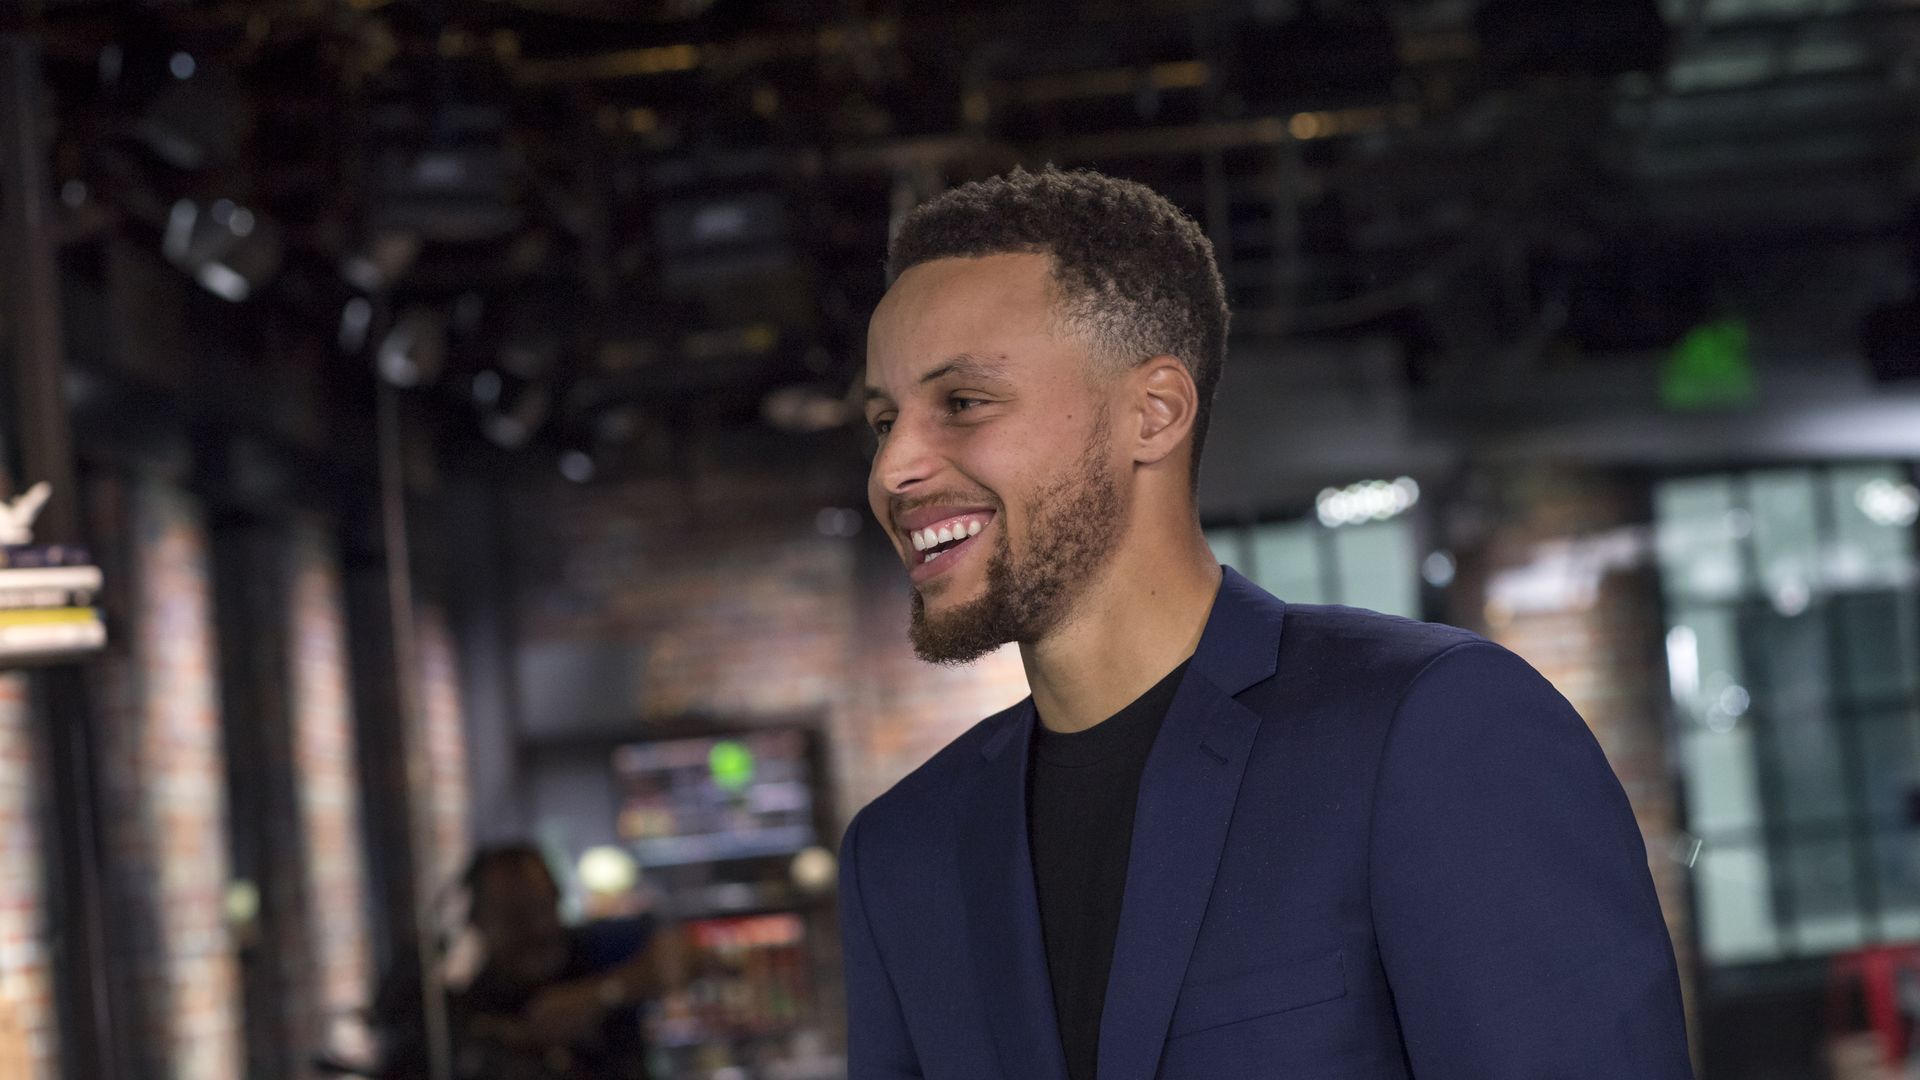 Stephen Curry during an interview in San Francisco in August 2017.